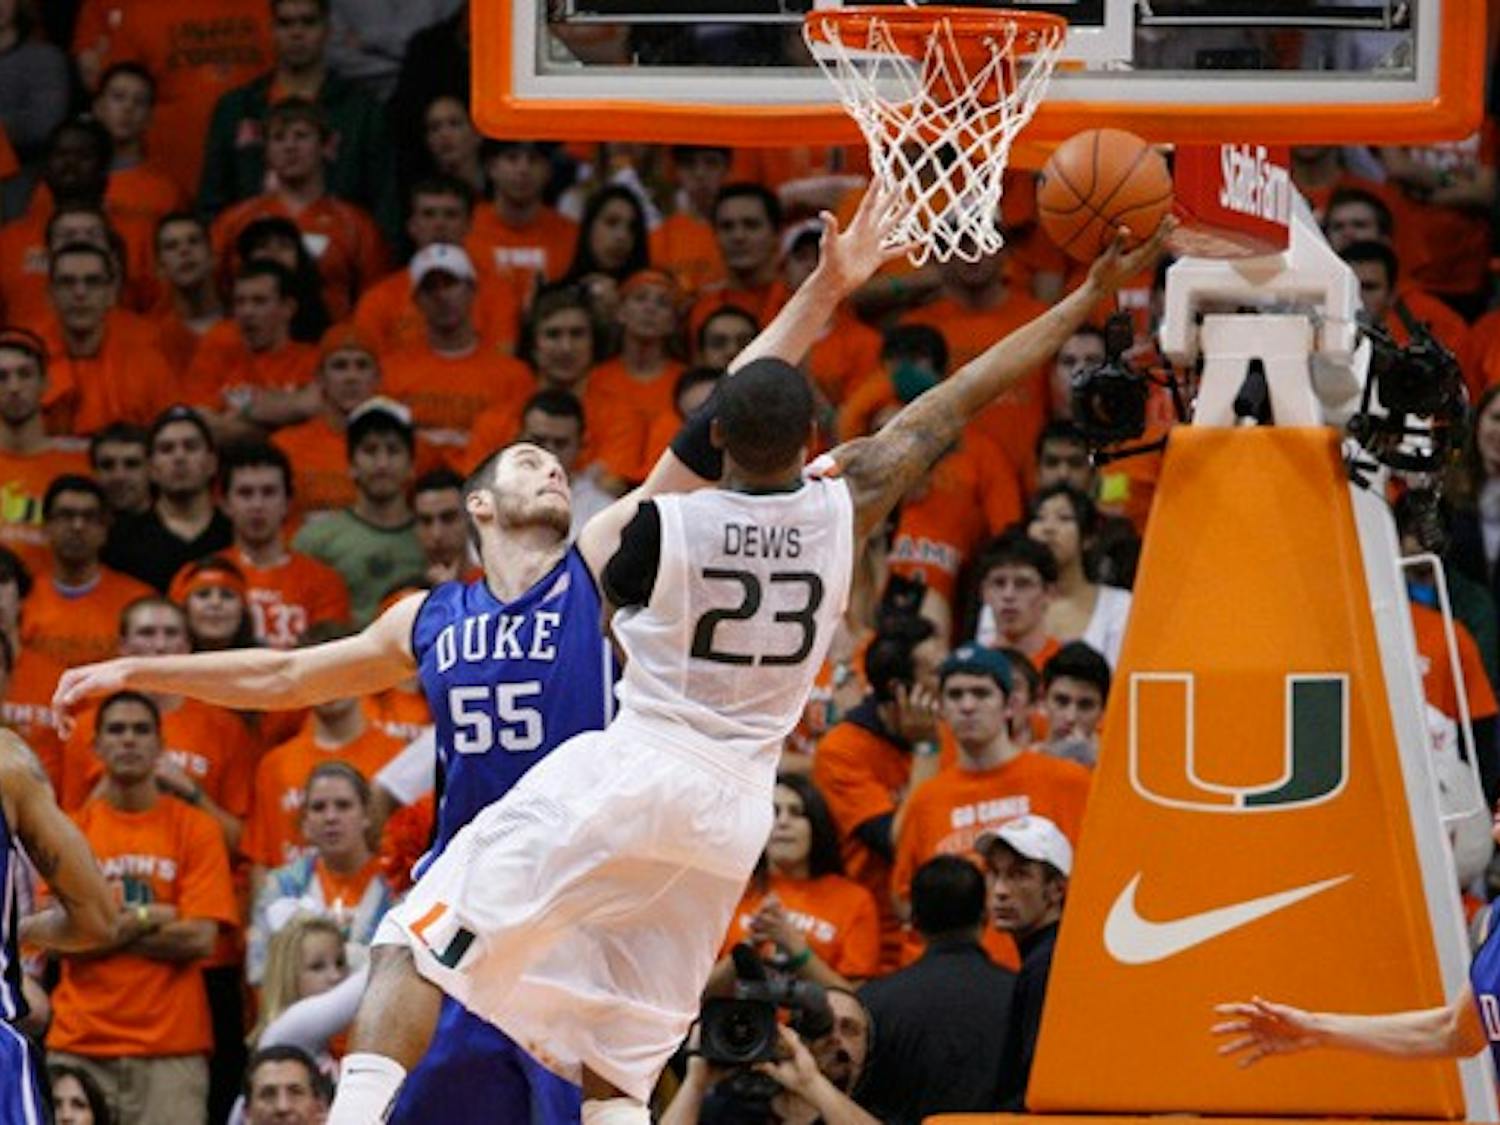 Senior Brian Zoubek goes up for a block against Miami’s driving guard, James Dews, during Duke’s seven-point escape at the BankUnited Center in Coral Gables, Fla.